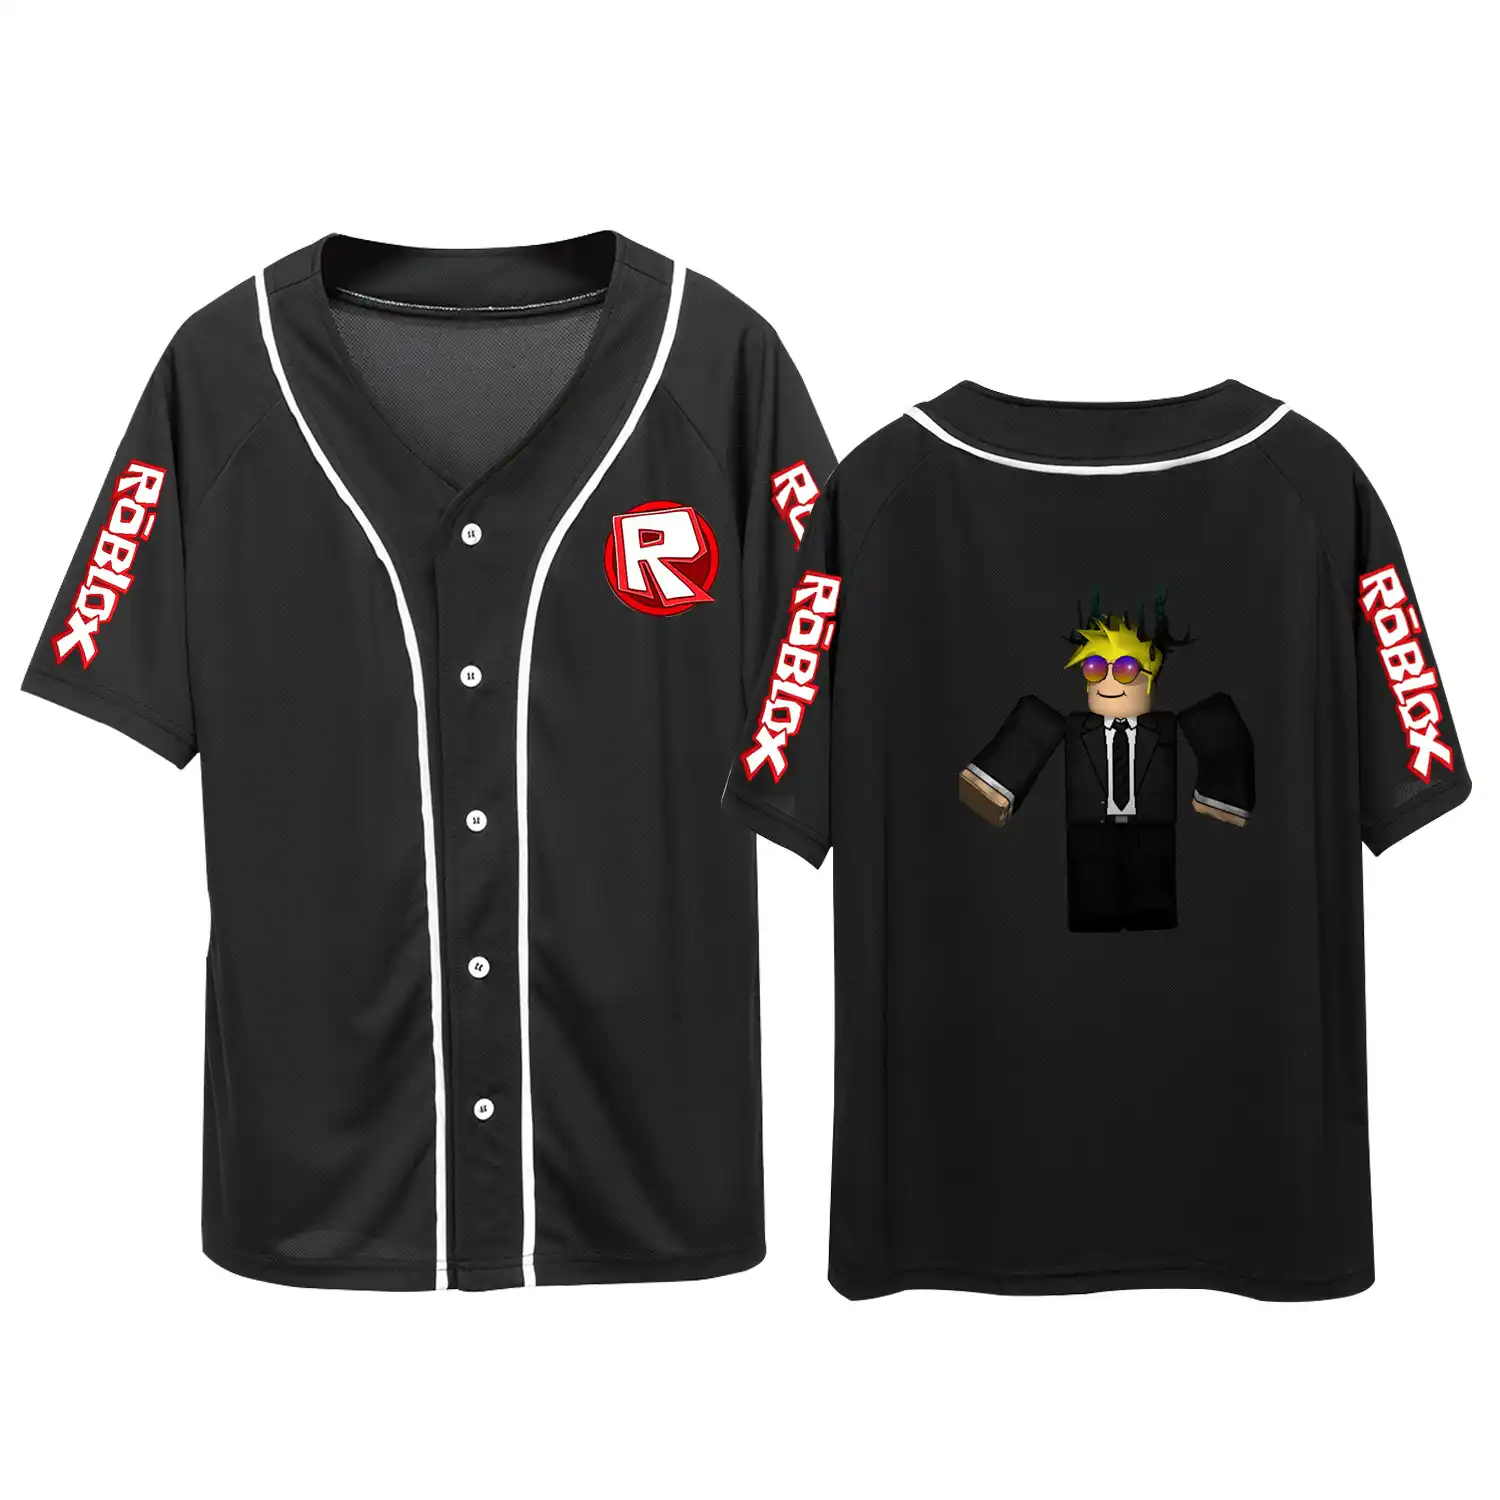 Roblox Hot Selling Related Products Baseball T Shirt Korean Style Slim Fit V Neck Short Sleeve Couple Clothes Clothes Aliexpress